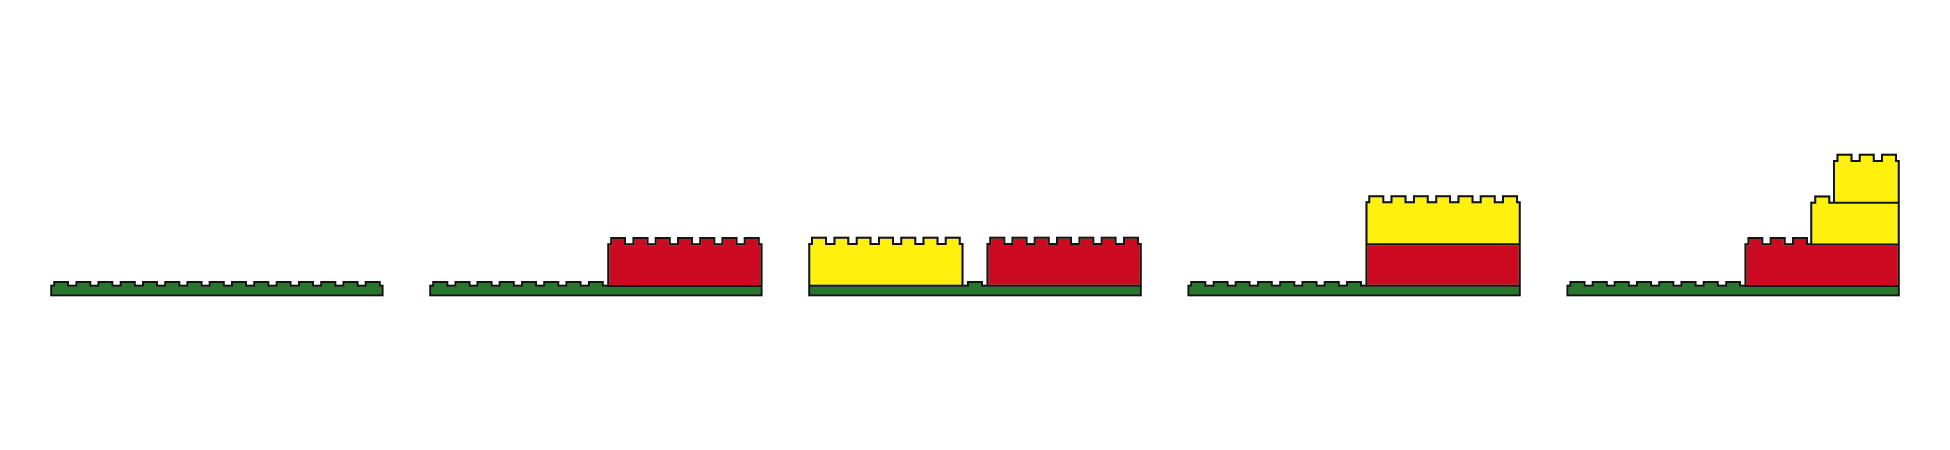 Five sample Lego™ pieces built in different designs.